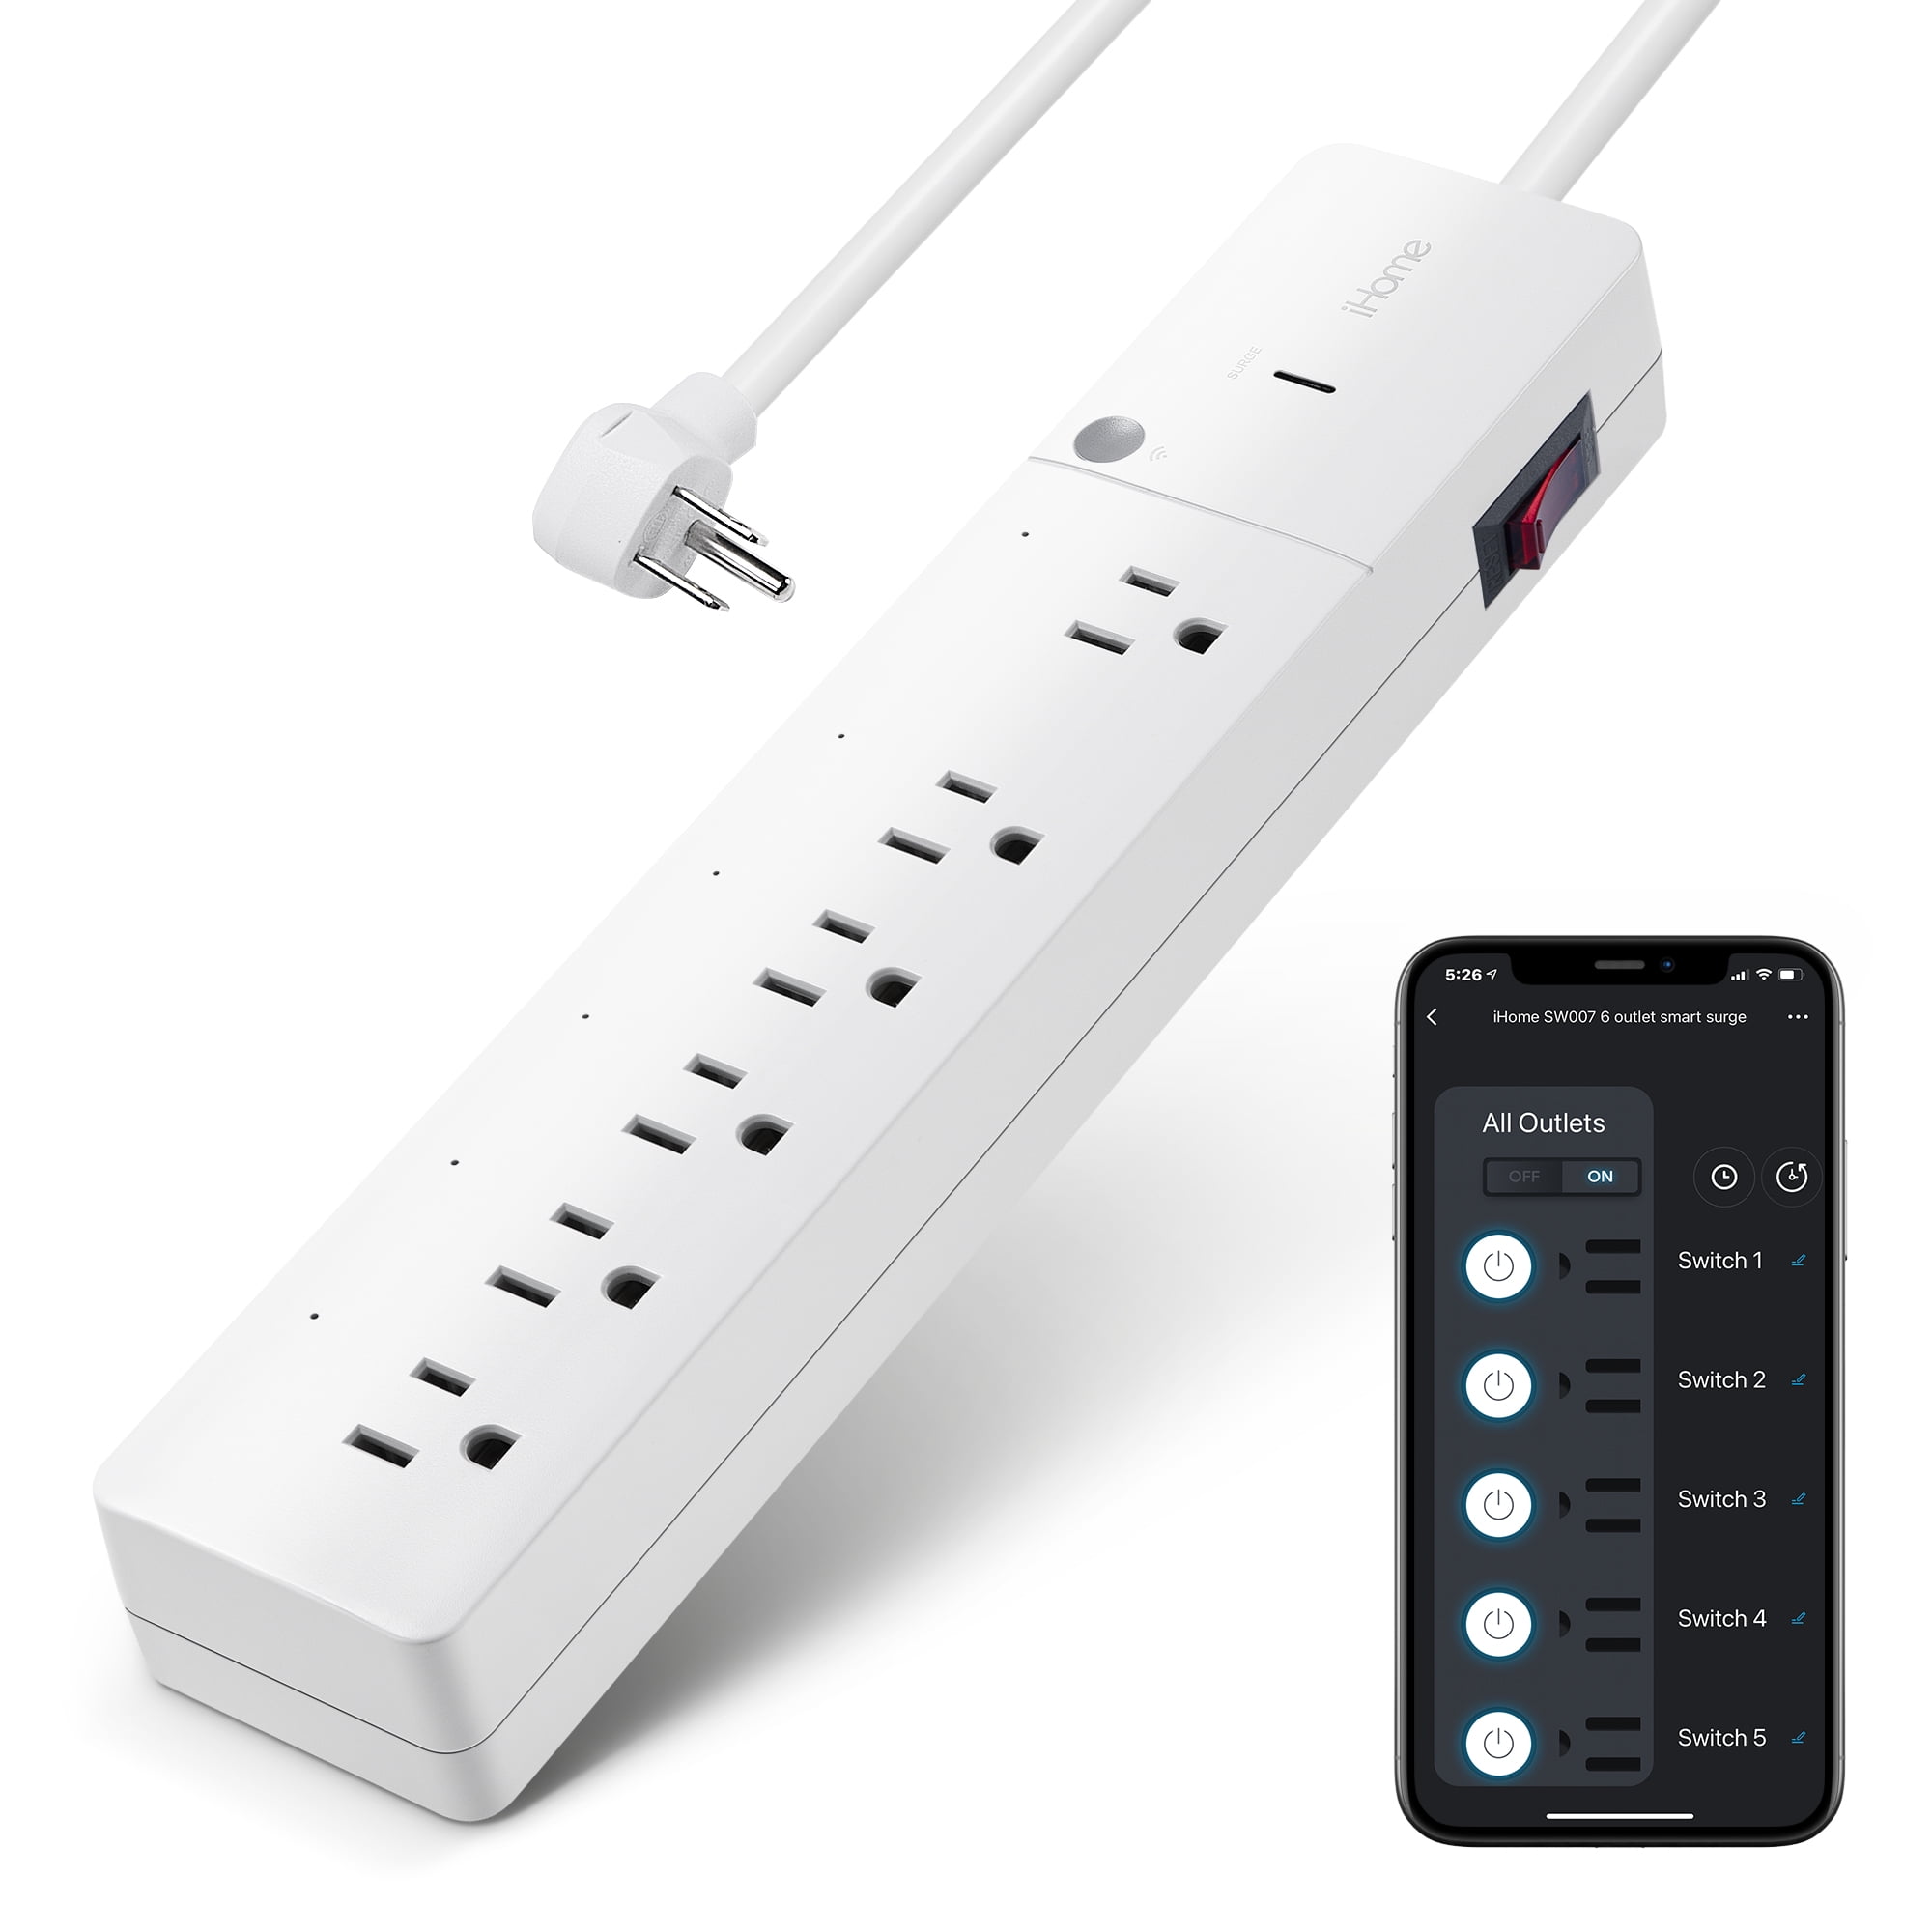 iHome 6 Outlet Smart Surge Protector Works with Alexa and Google